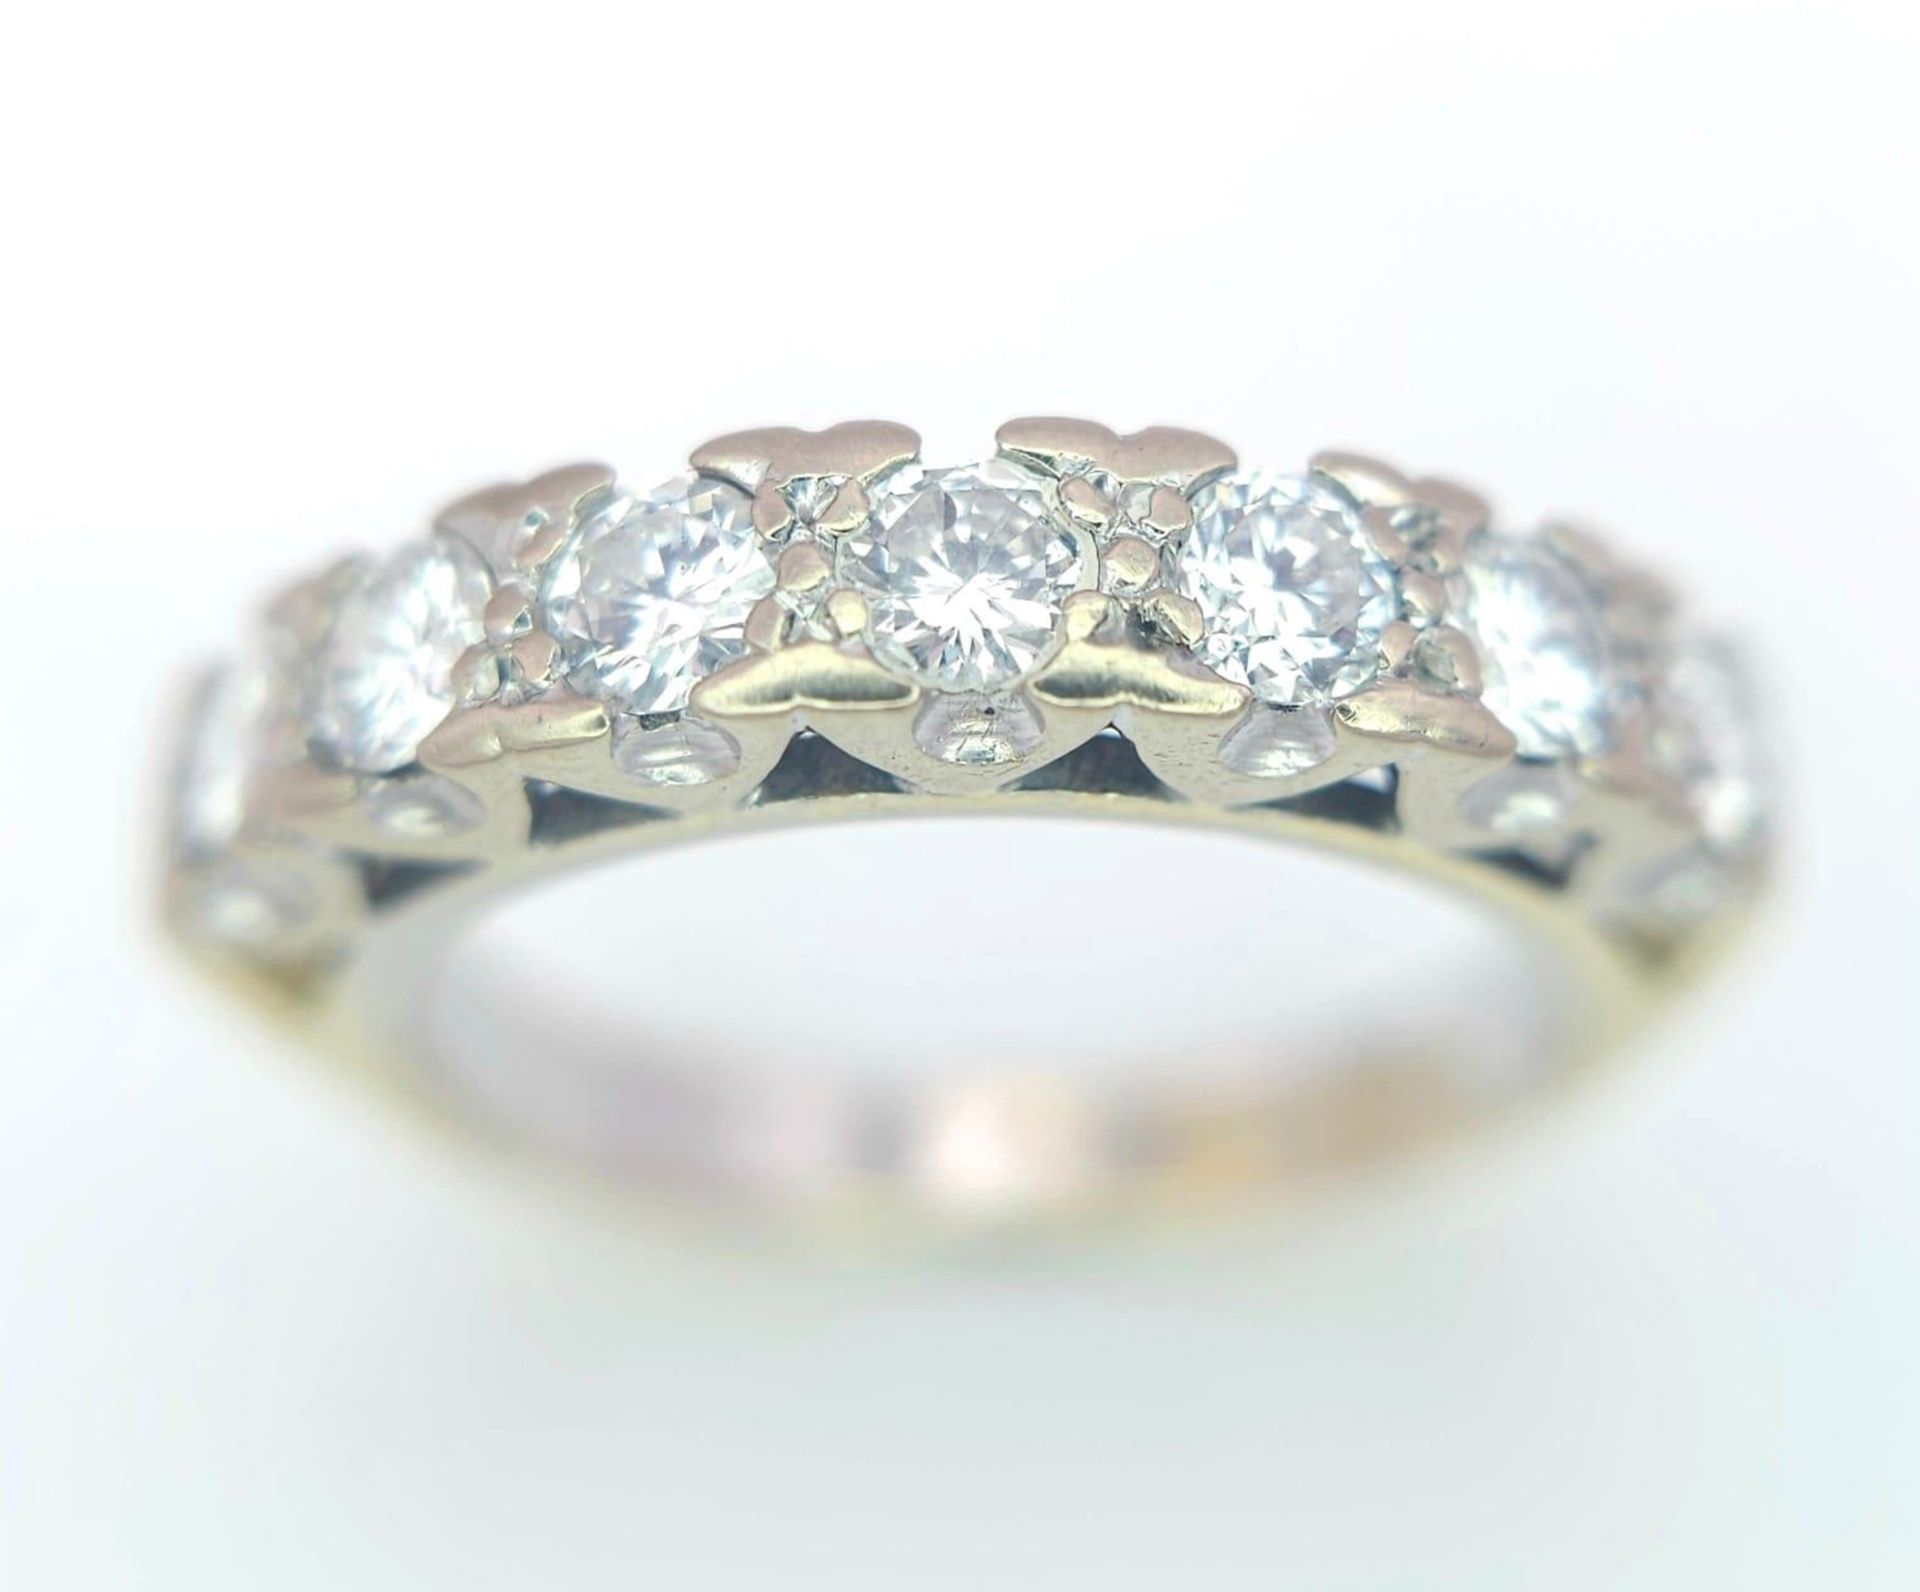 An 18K Yellow Gold Diamond Half Eternity Ring. 0.70ctw, Size J1/2, 3.6g total weight. Ref: 8451 - Image 2 of 7